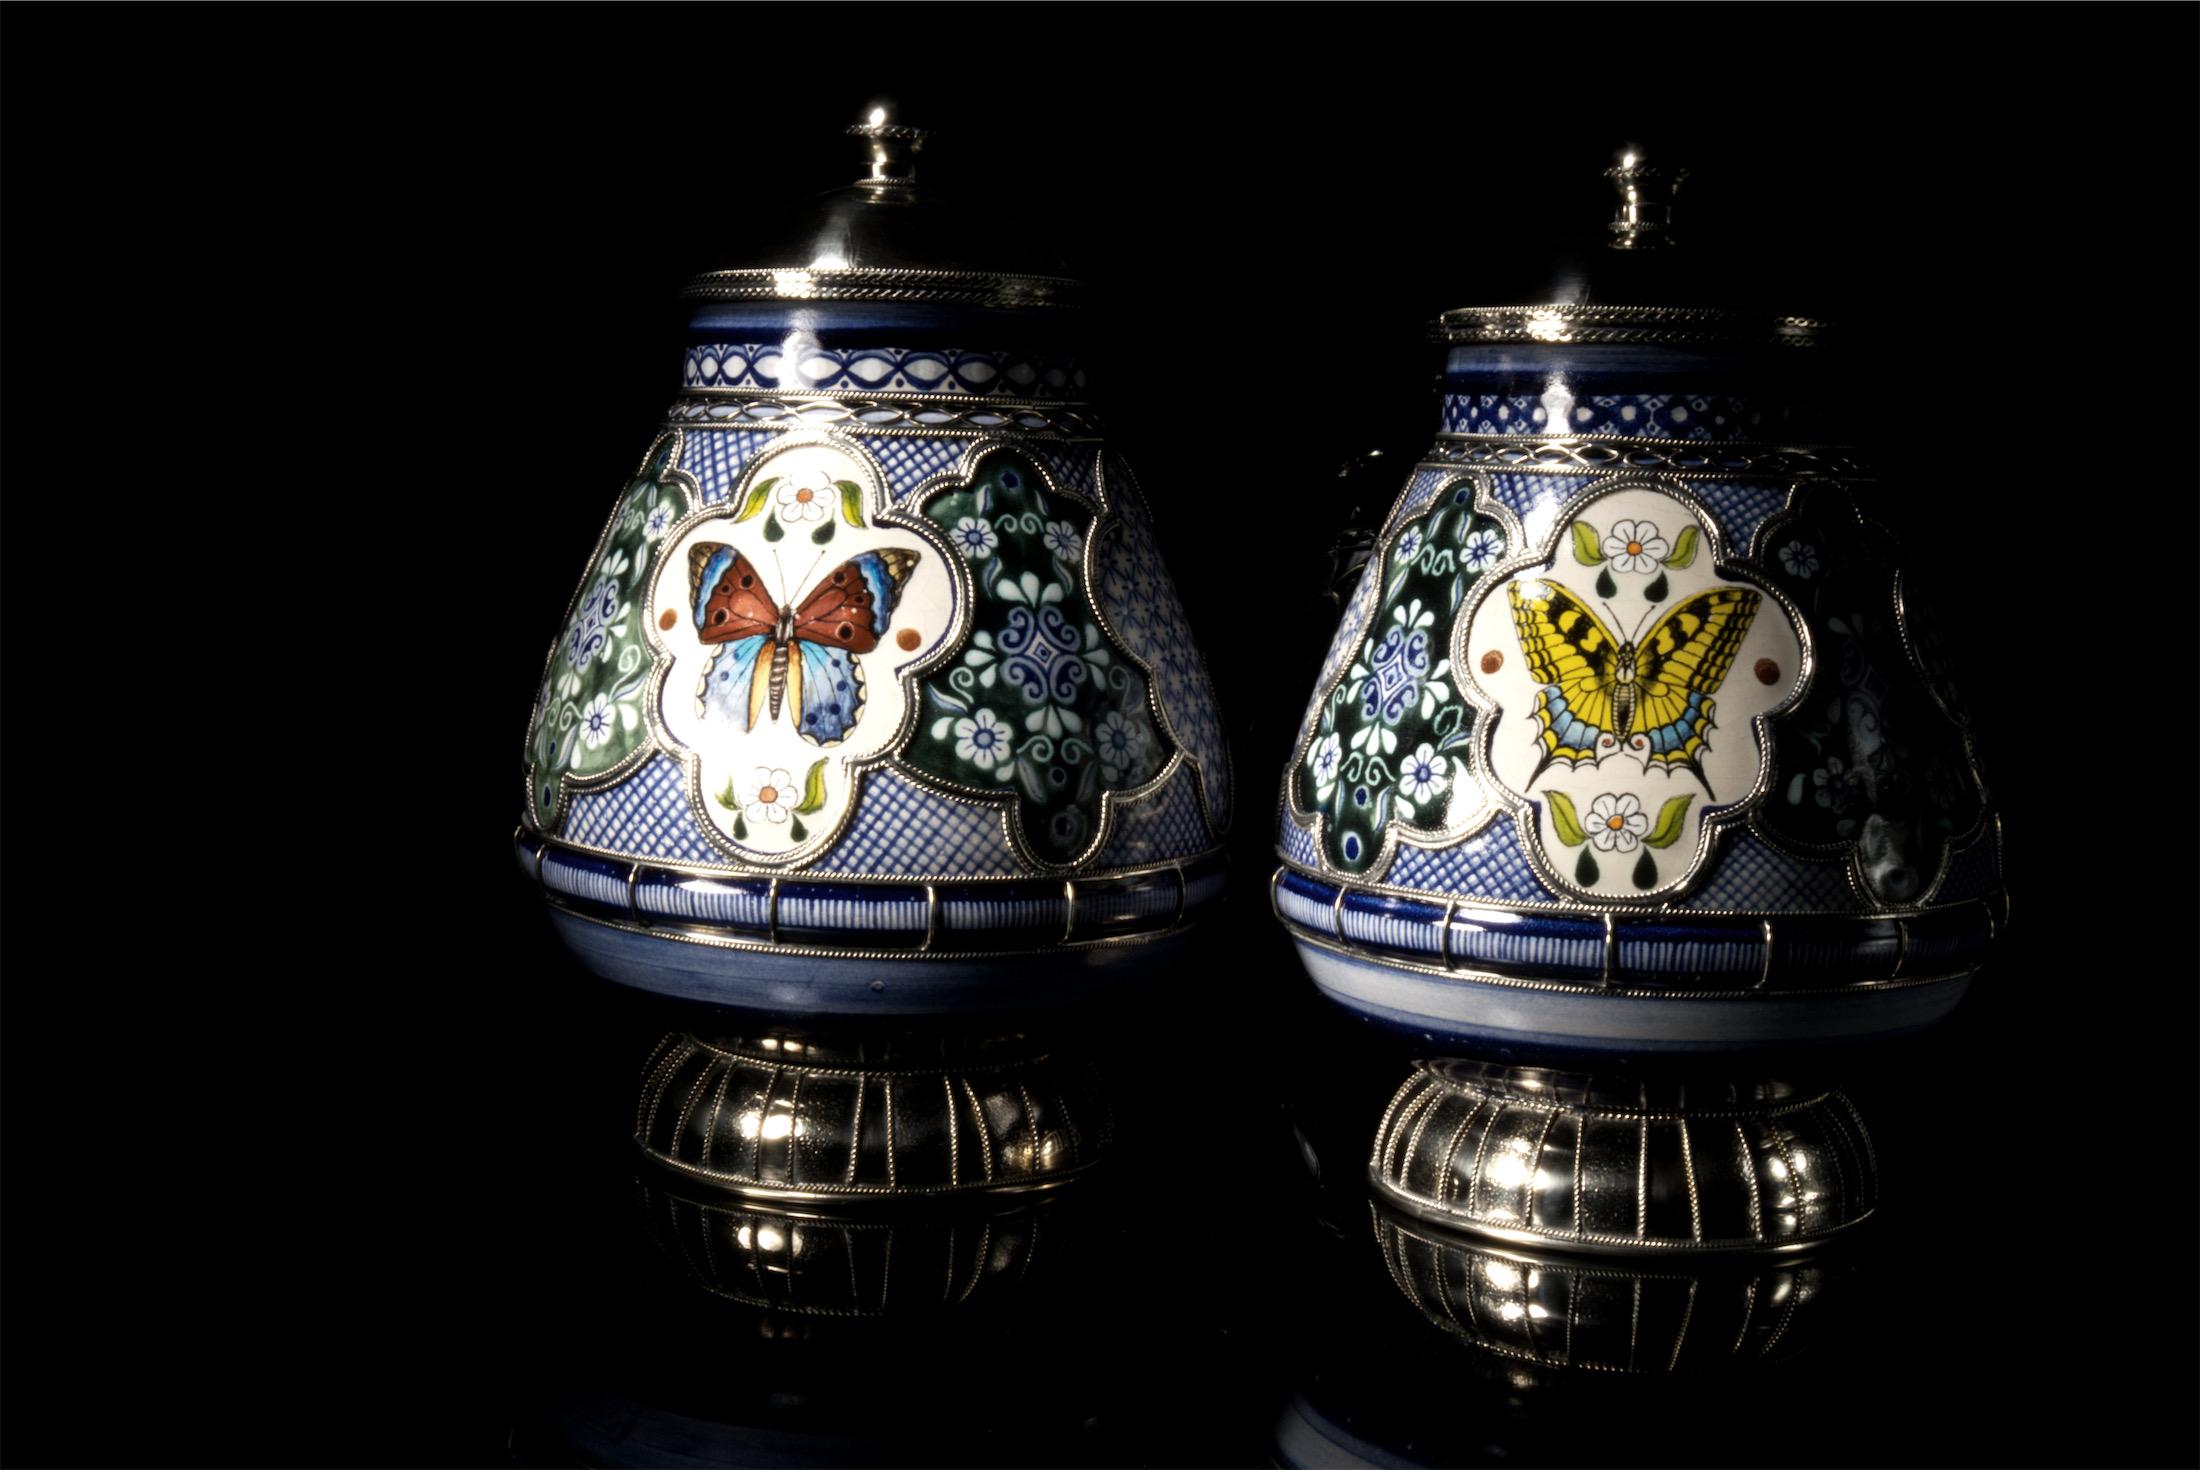 Mexican Ceramic and White Metal 'Alpaca' Jar with Hand Painted Motives Pair